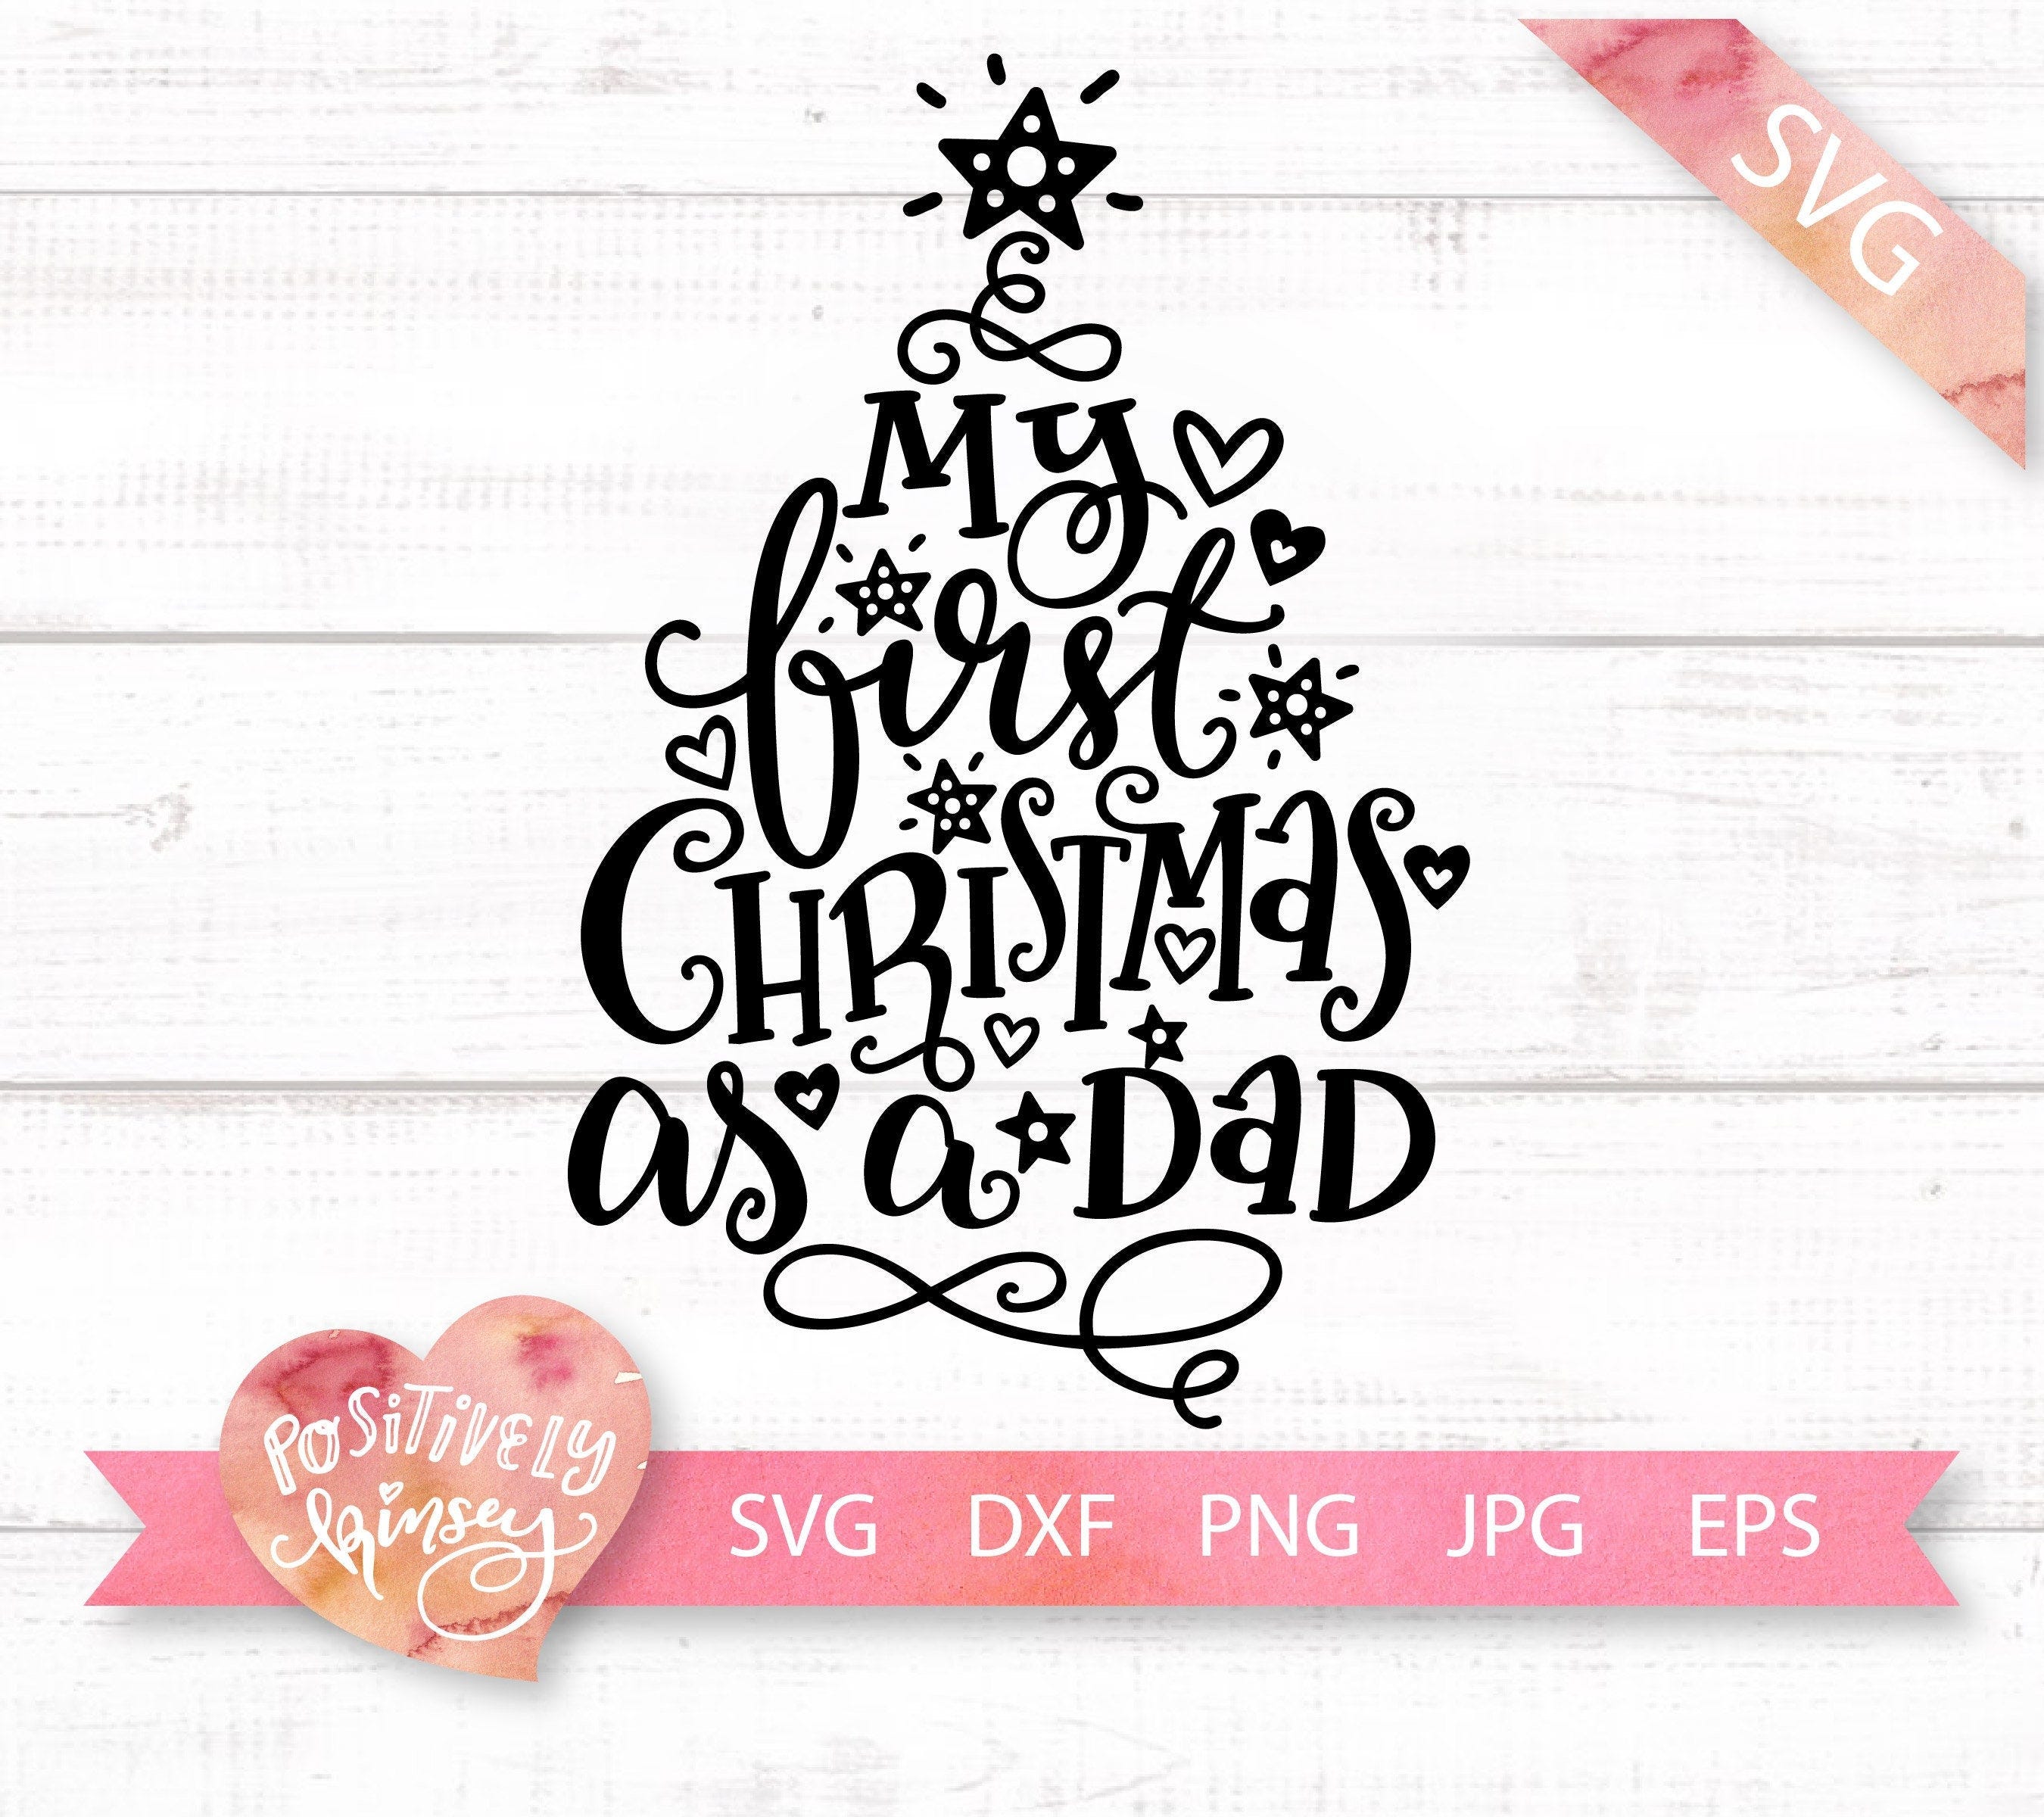 My First Christmas as a Dad SVG, Dad